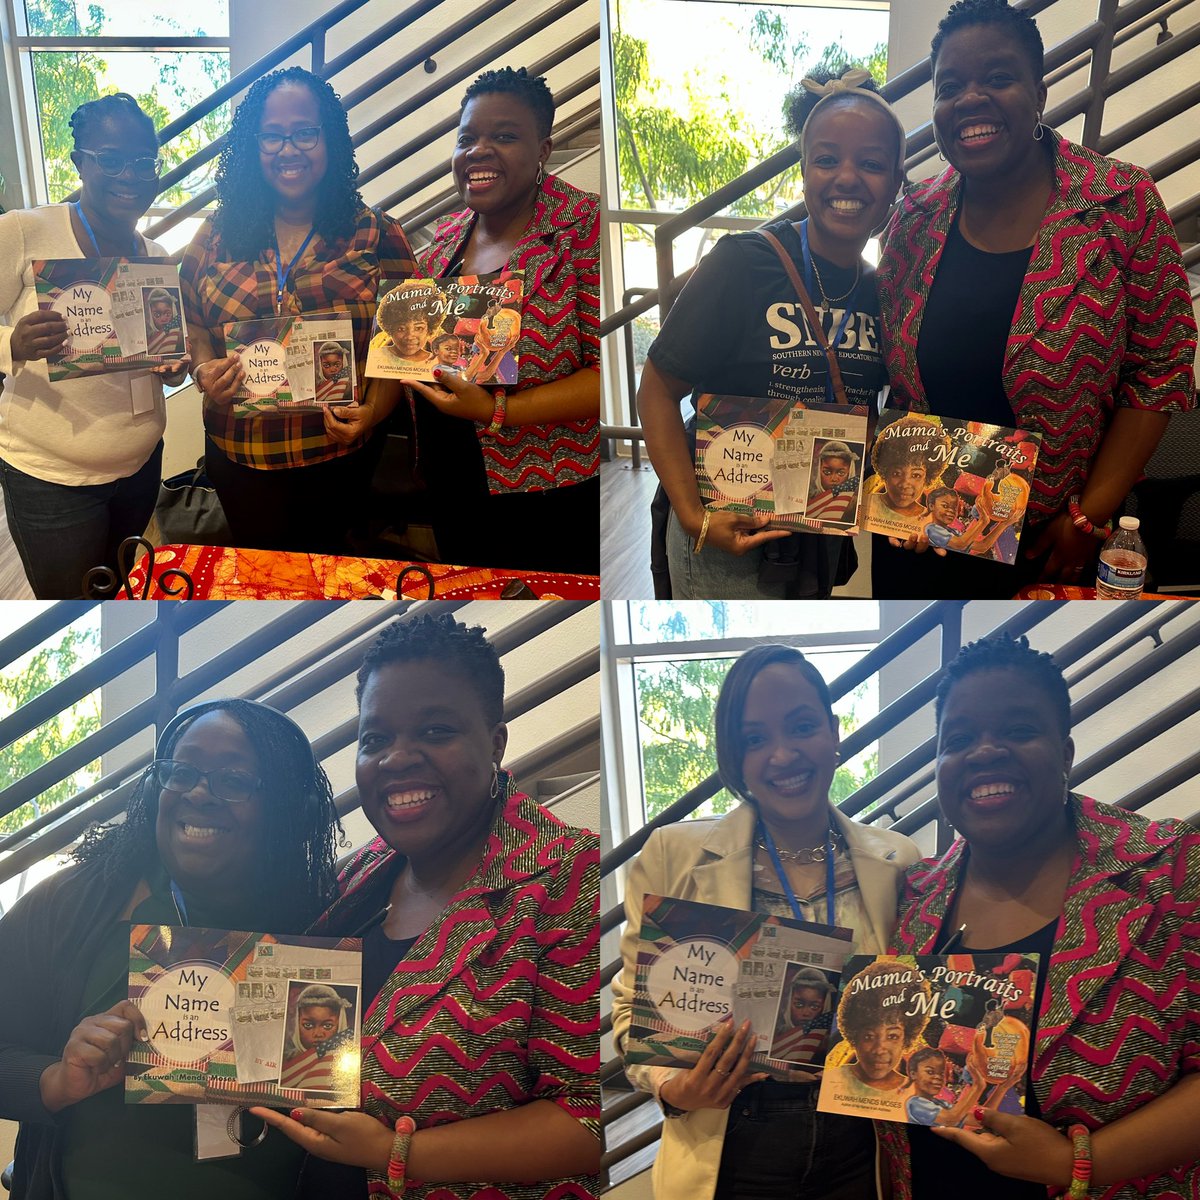 I presented the keynote & signed my books at the @_SNBEI “Equity within Diversity” conference. I enjoyed chatting with Jay, @CodeSwitchLV, Las Vegas educators, & other participants! @tracyrenee70 & Jordan, thank you for the invitation! #MyNameIsAnAddress #MamasPortraits